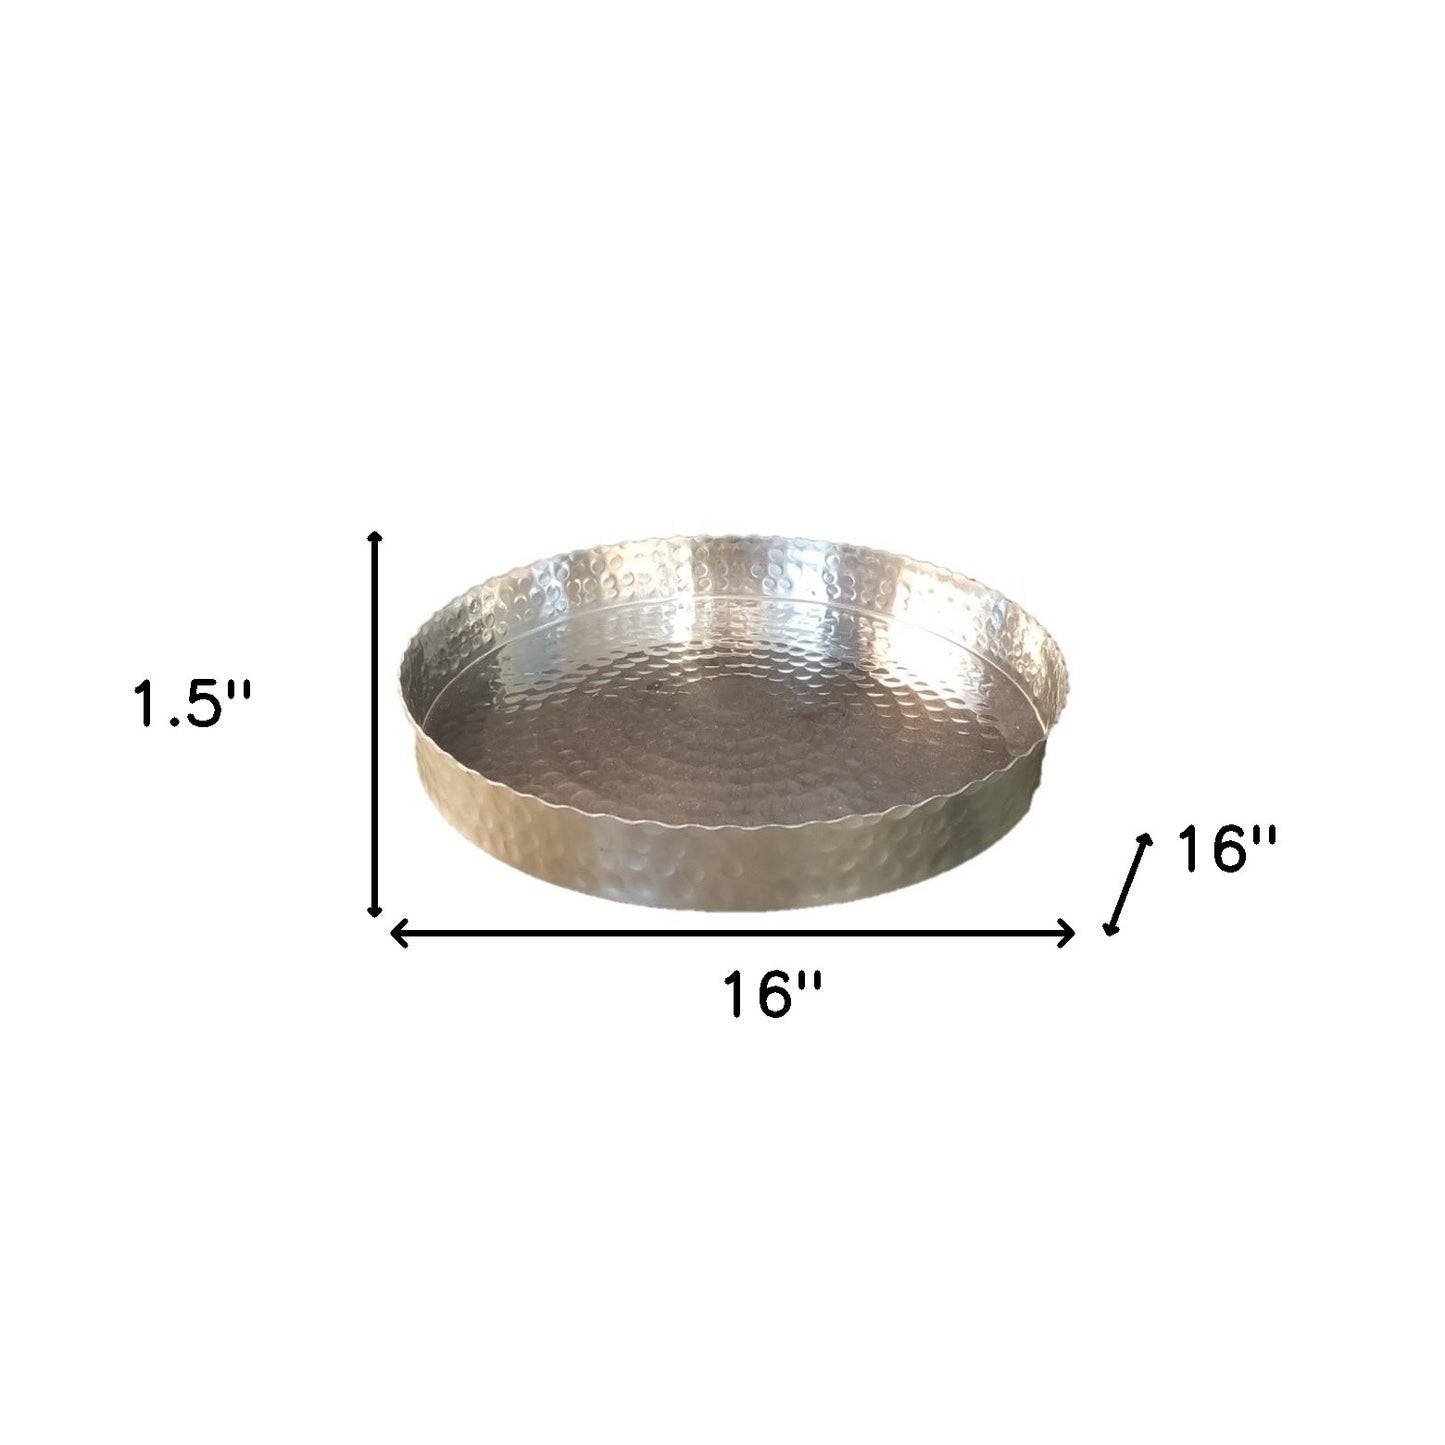 16" Silver Handcrafted Hammered Stainless Steel Round Tray